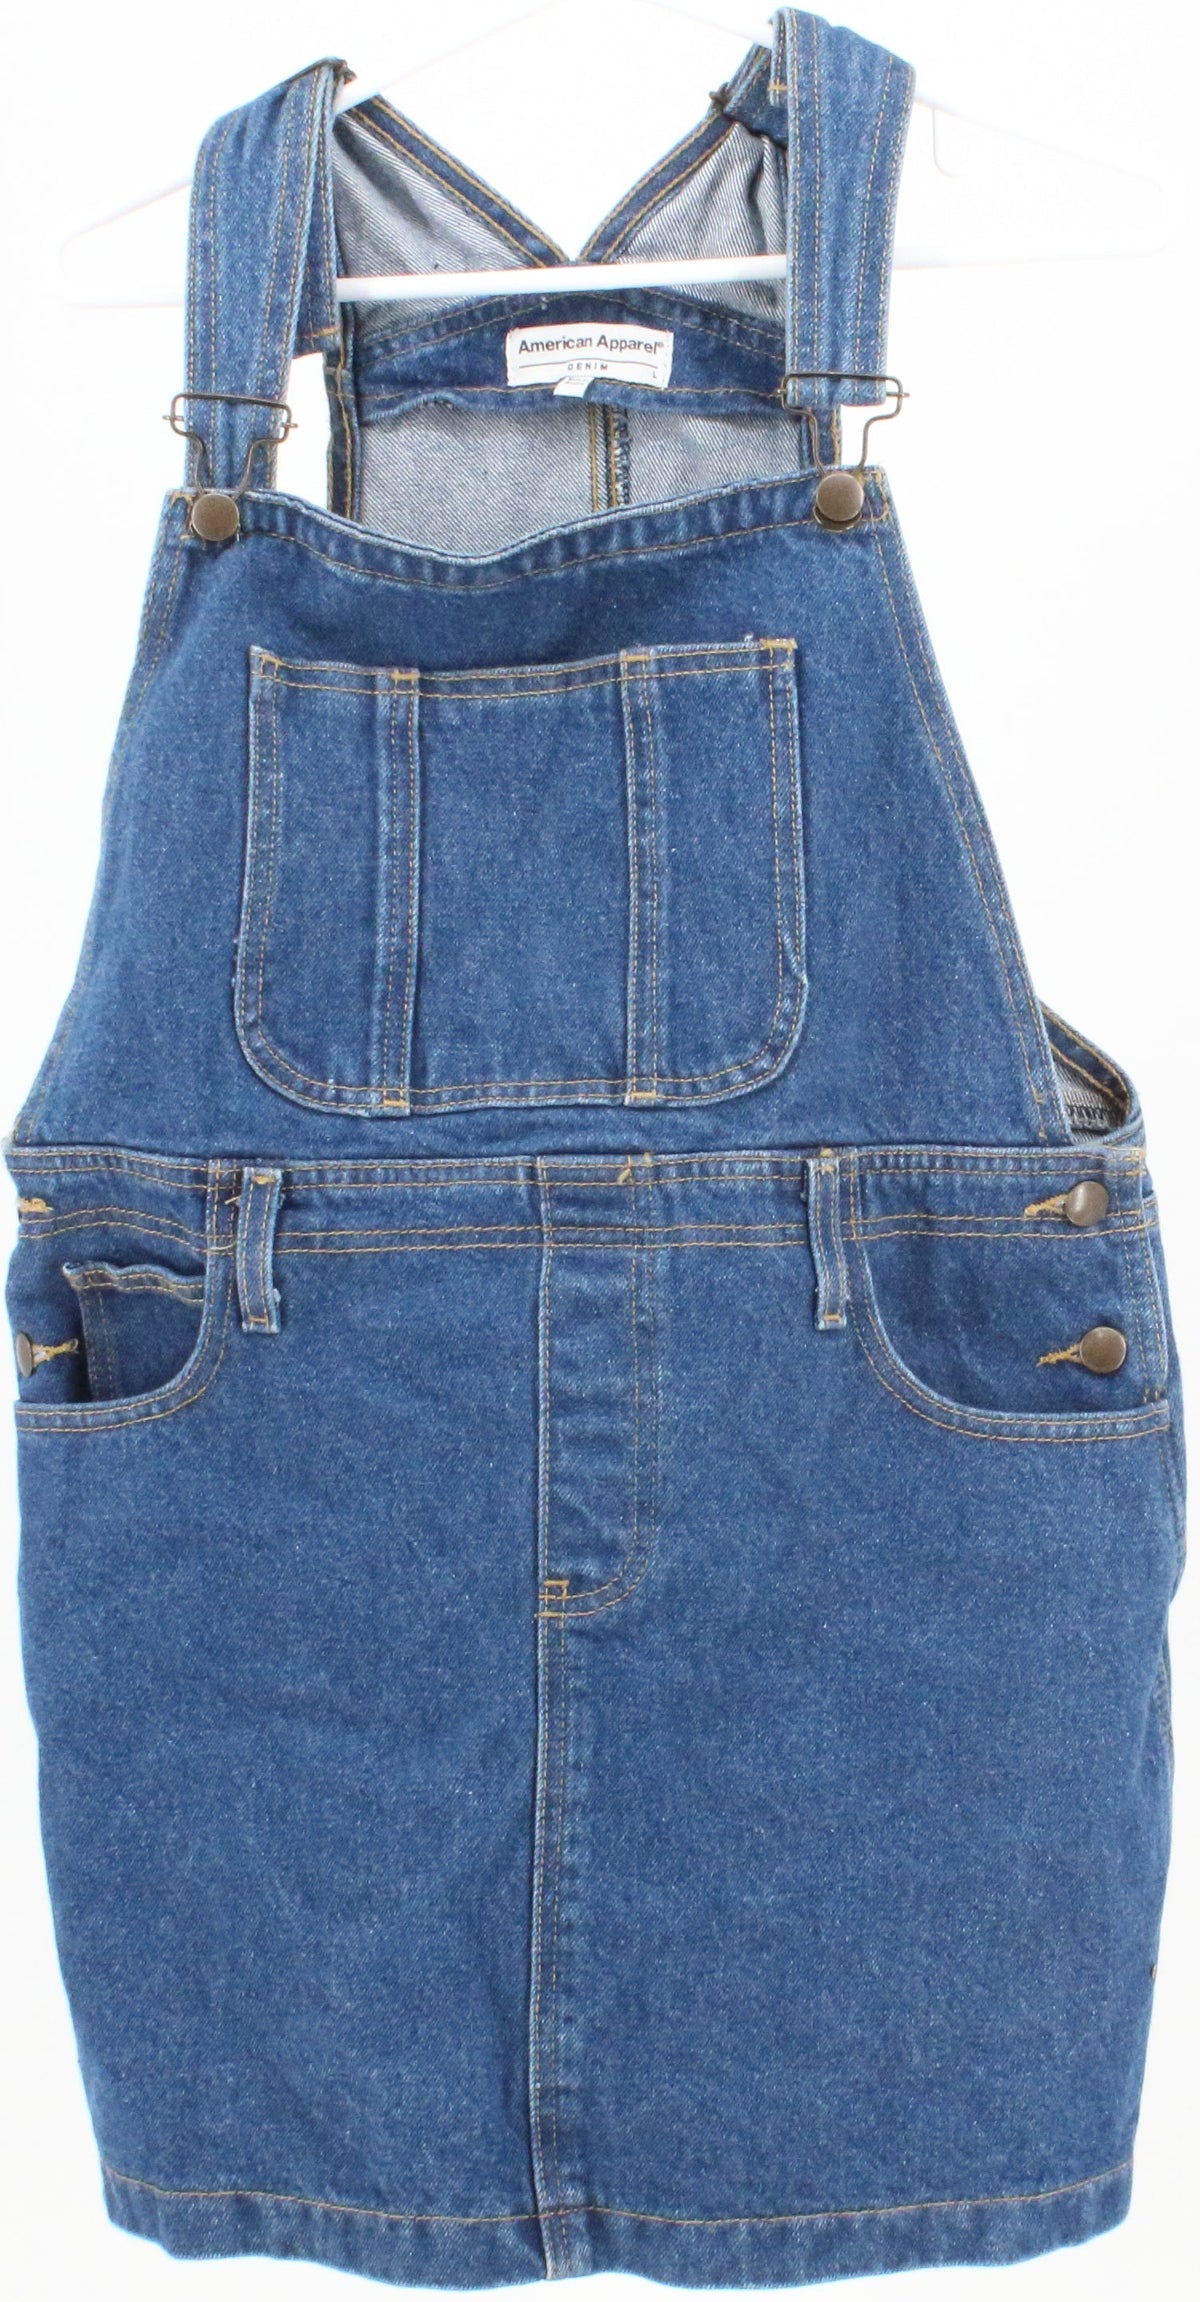 American Apparel Denim Blue Wash Overall Style Dress